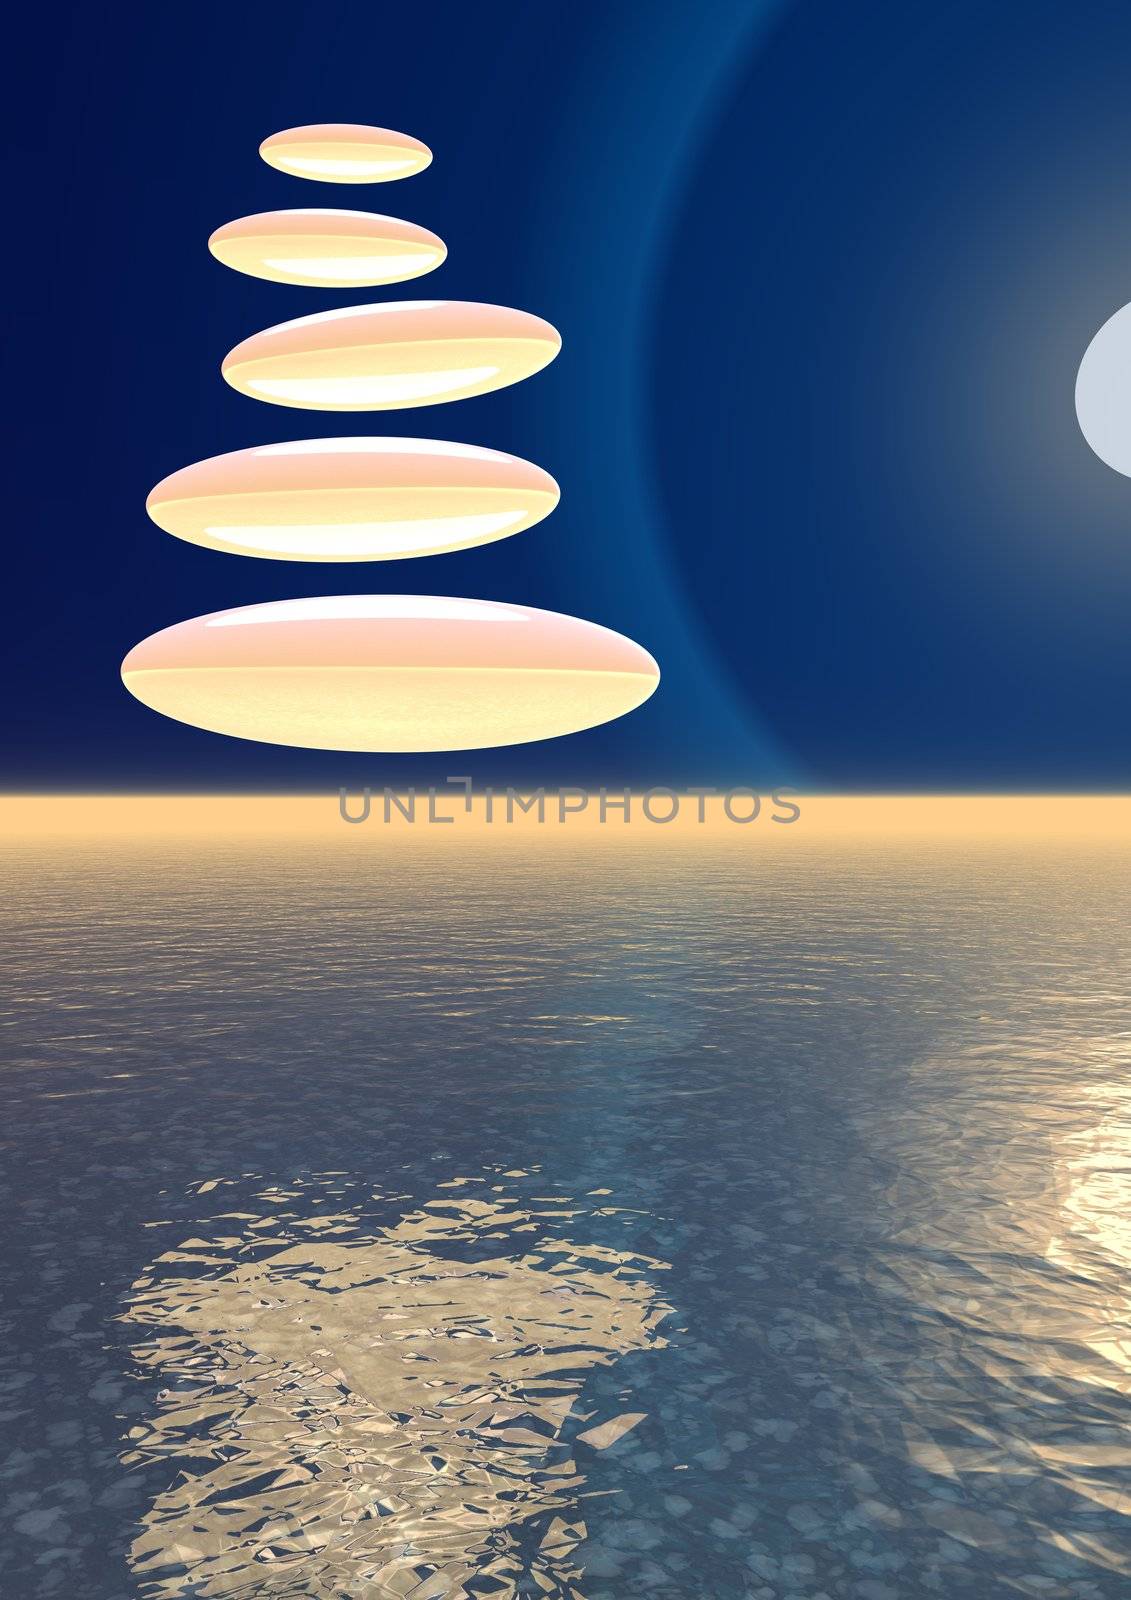 Orange stones in a deep blue sky upon the ocean and next to the moon by night